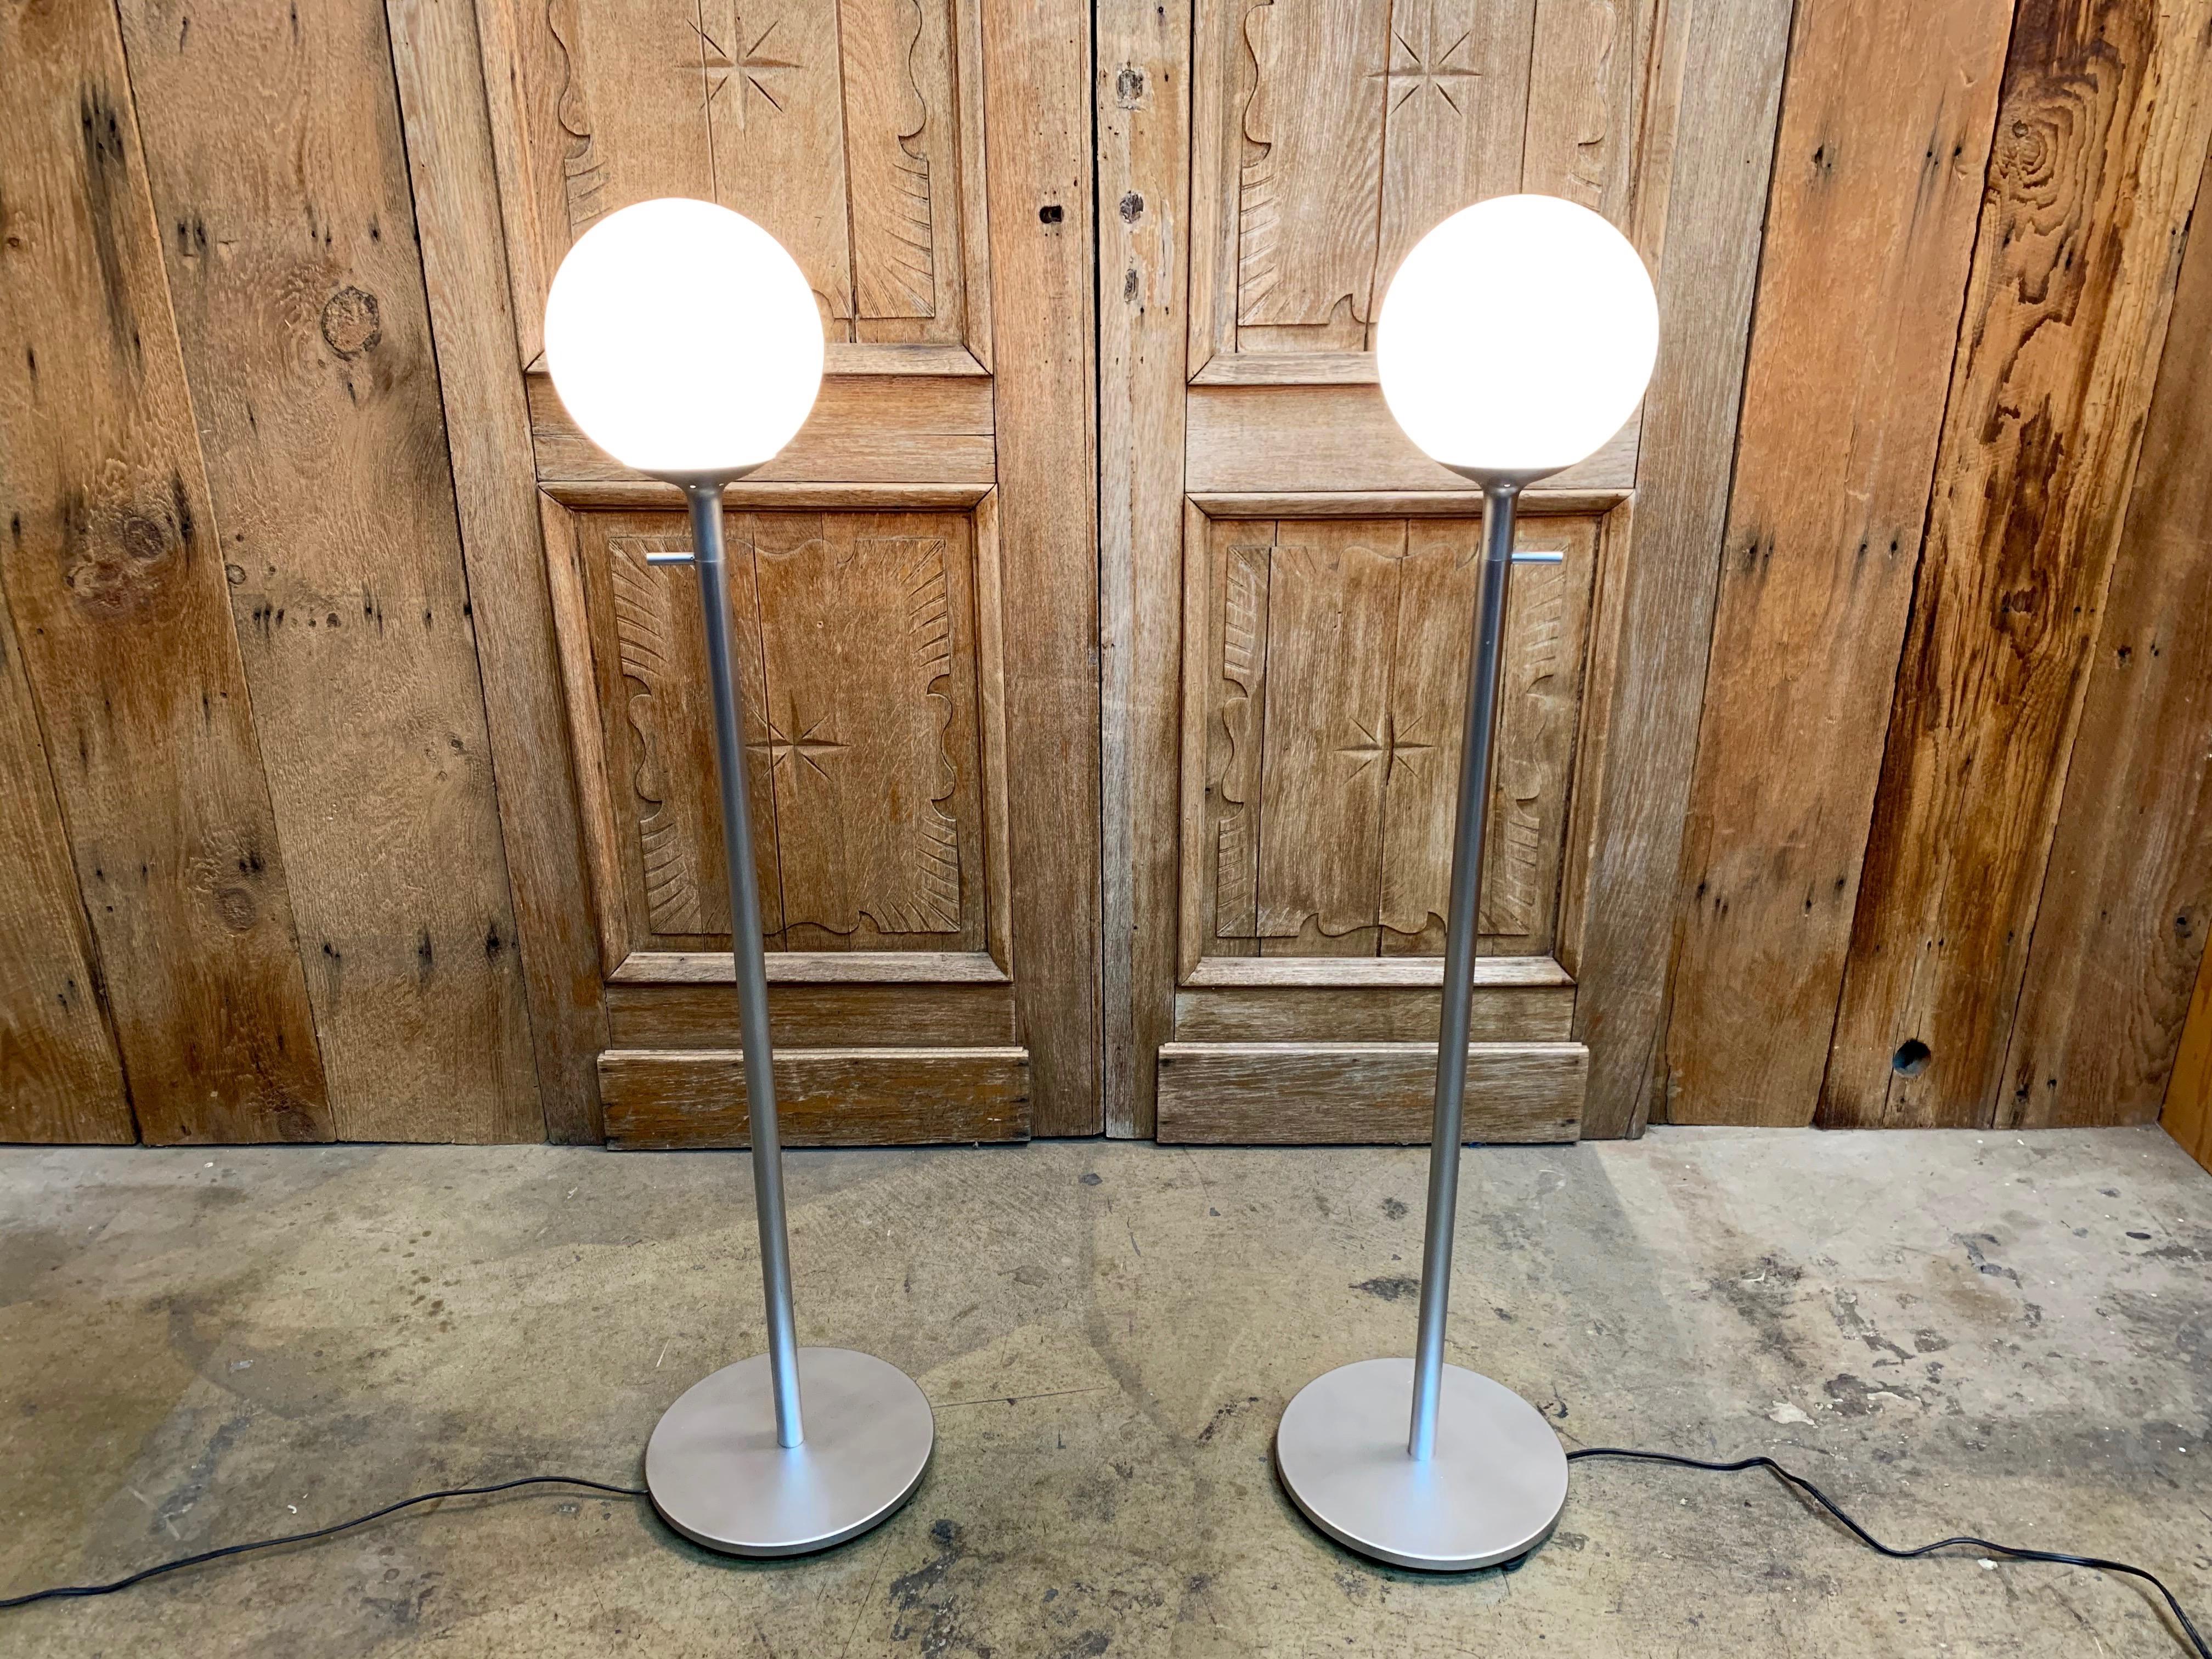 Vintage Globe Floor Lamps by ClassiCon 4